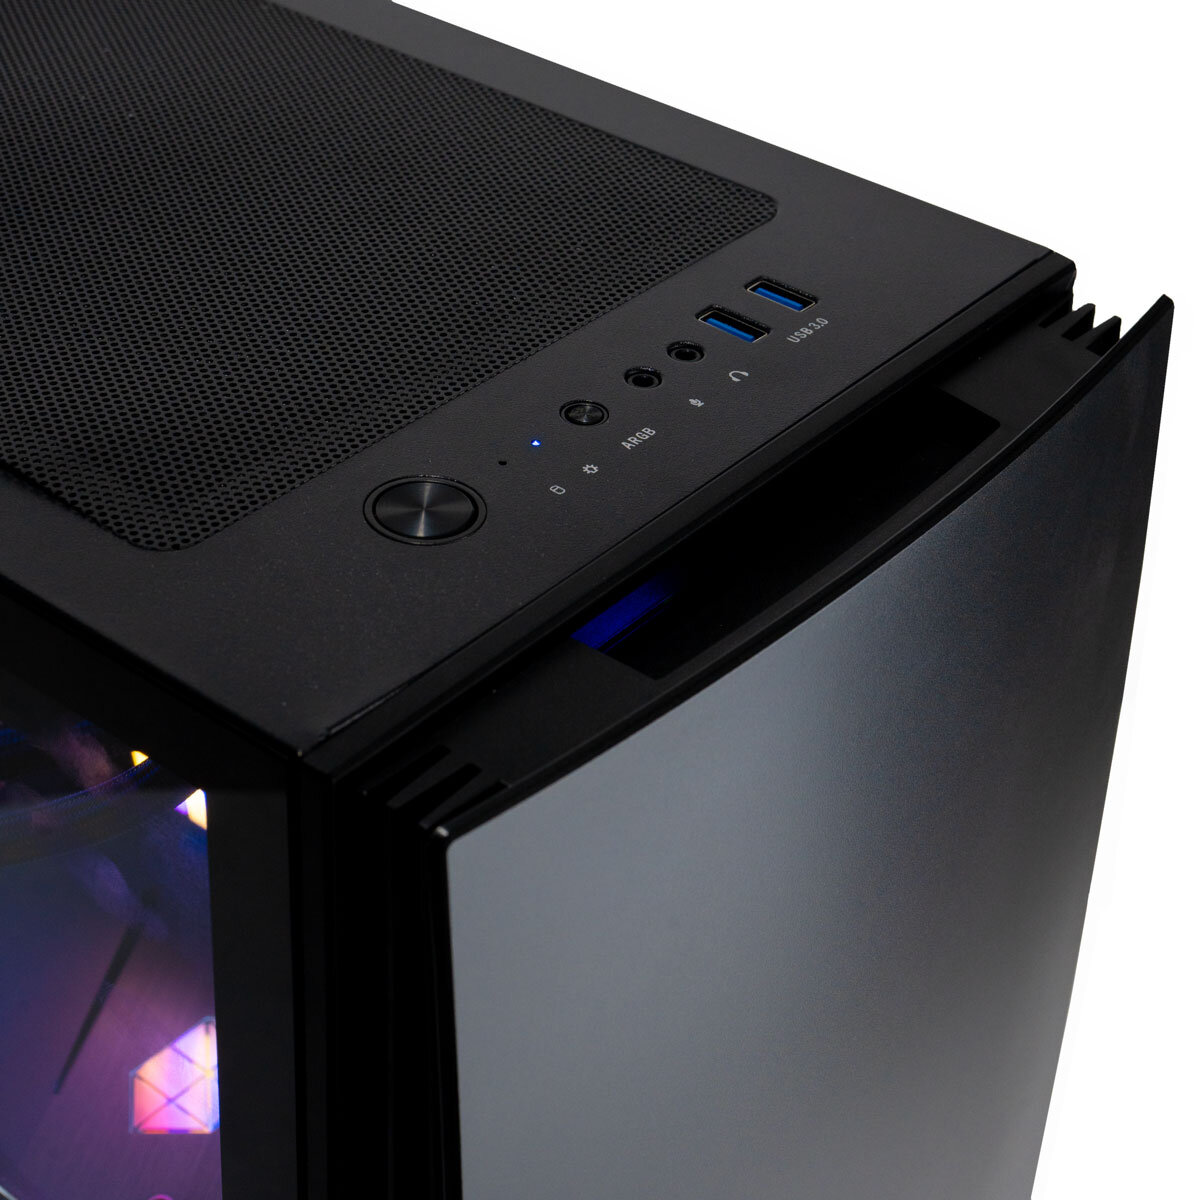 100 off the AWD-IT Candidus 5 Gaming Desktop PC - Available now at Costco